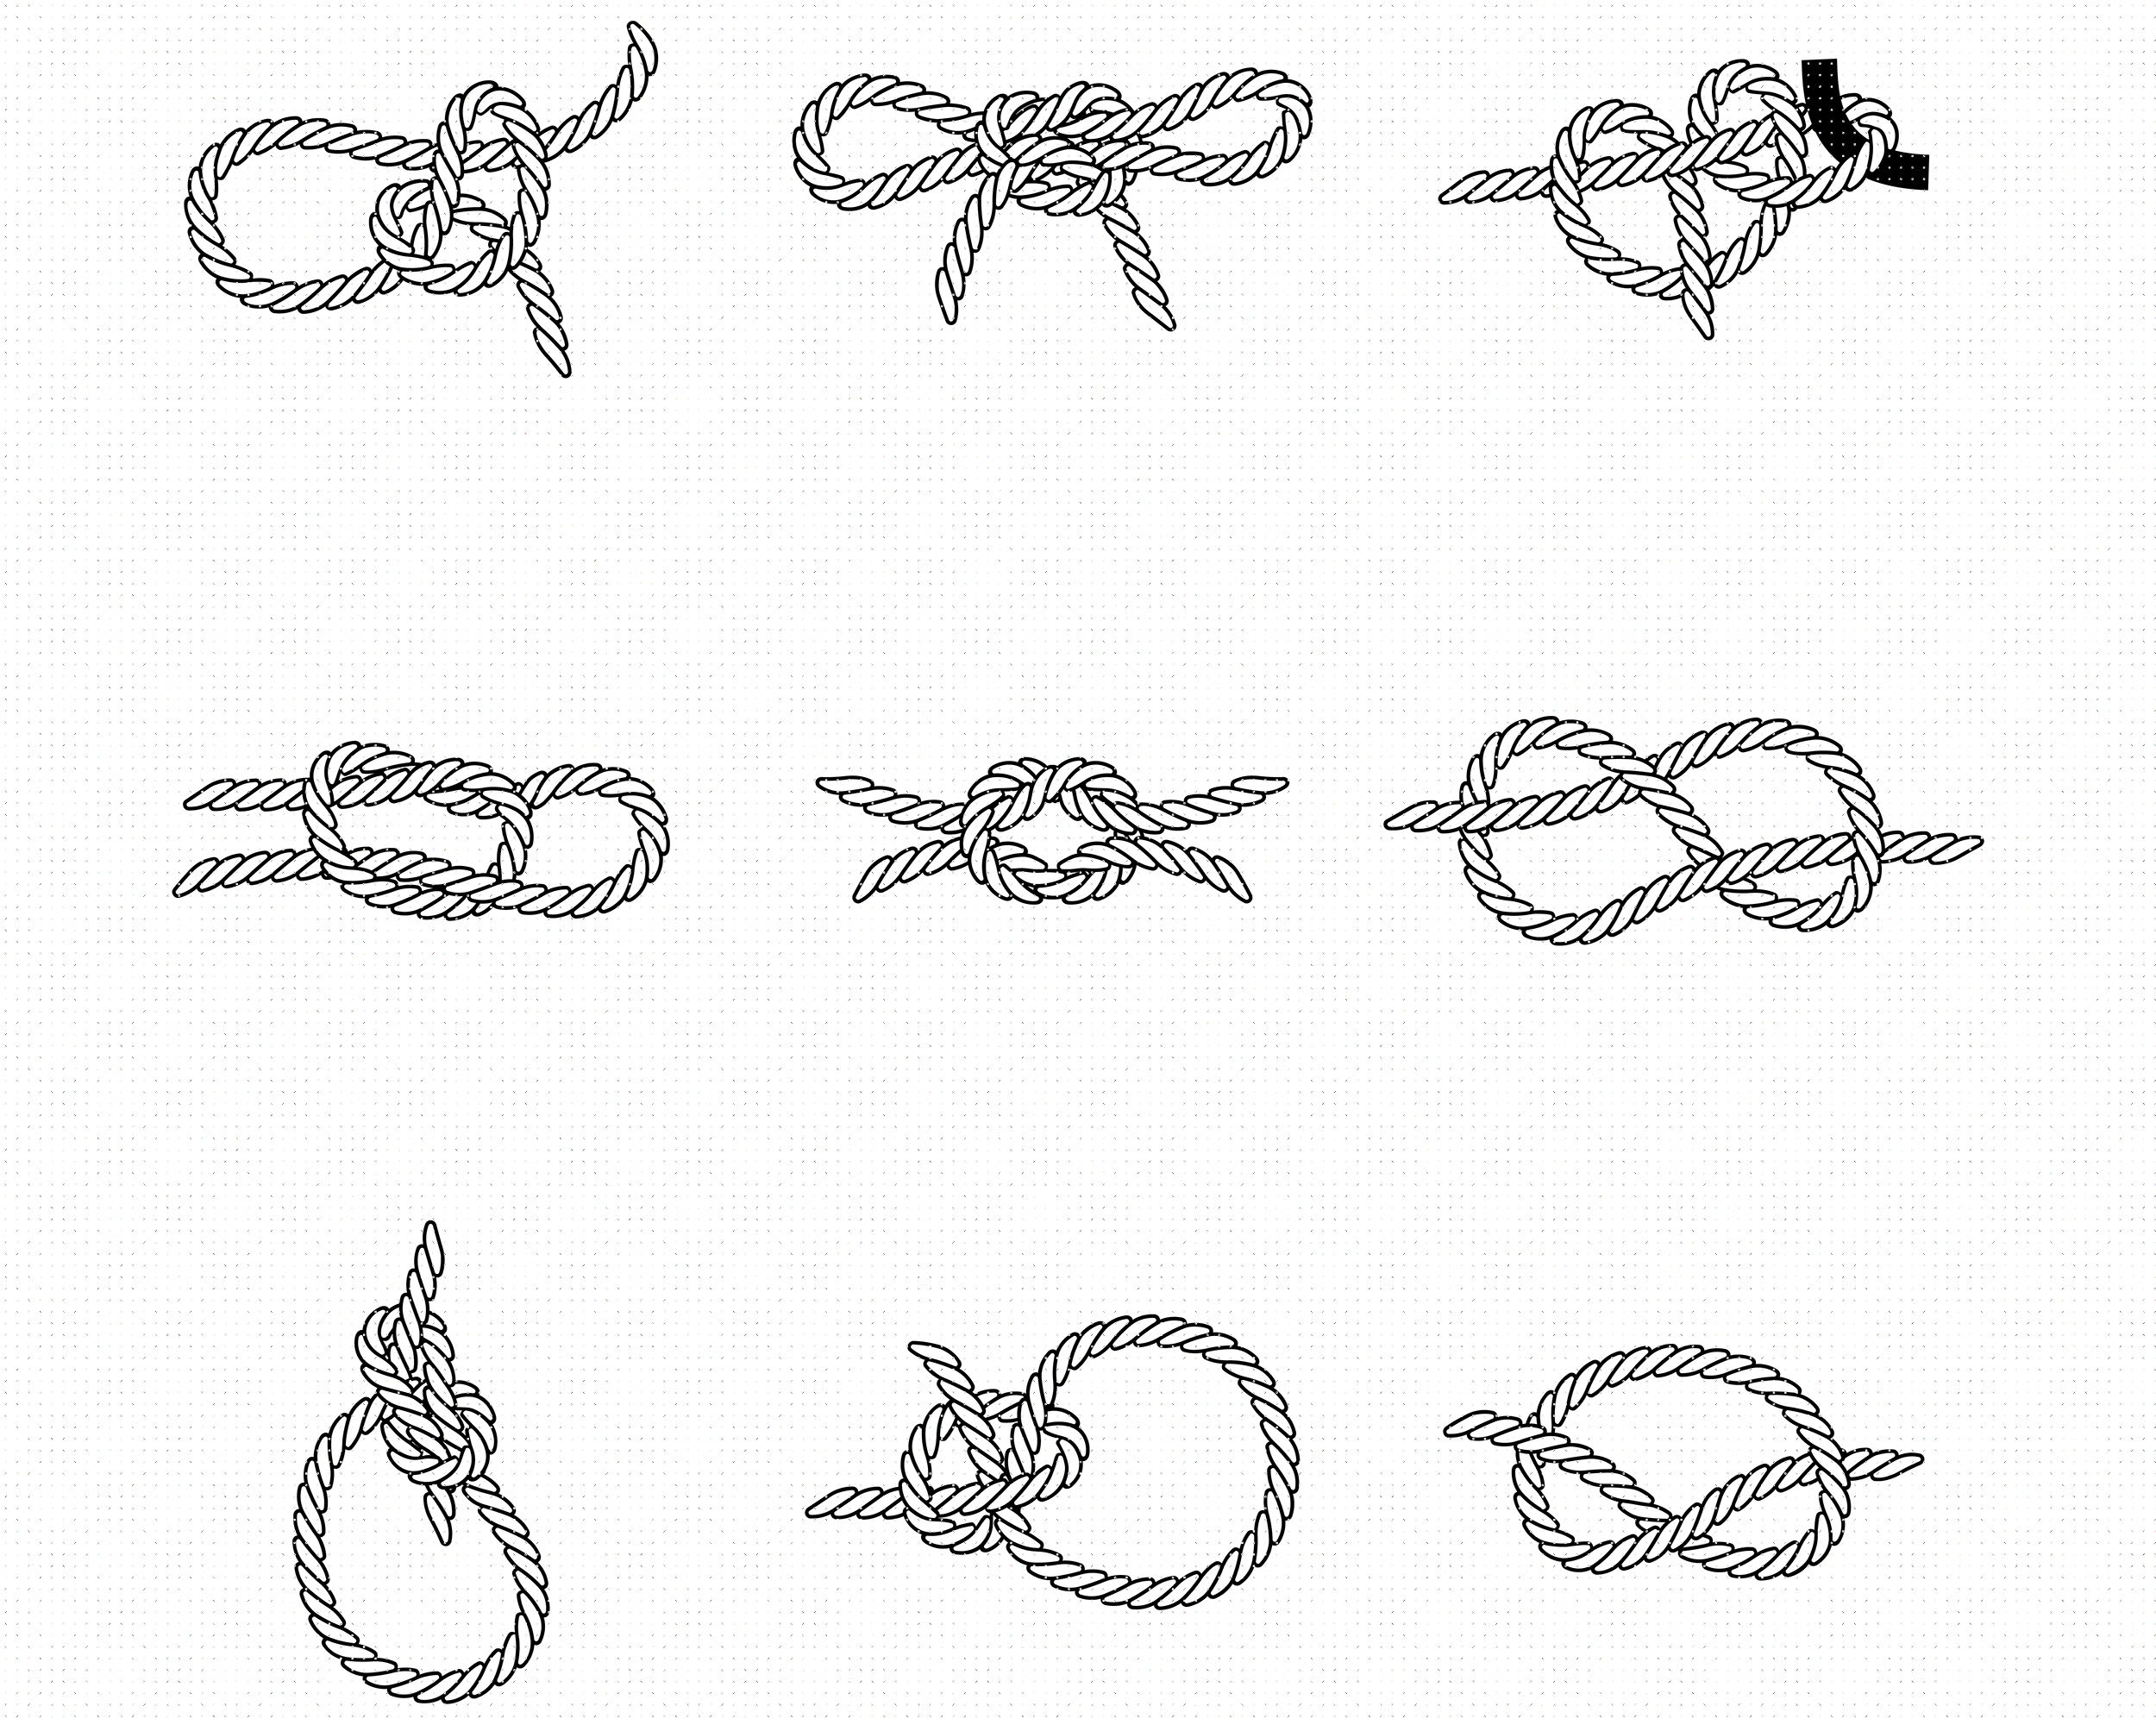 rope knots SVG, knot types PNG, DXF, clipart, EPS, vector By